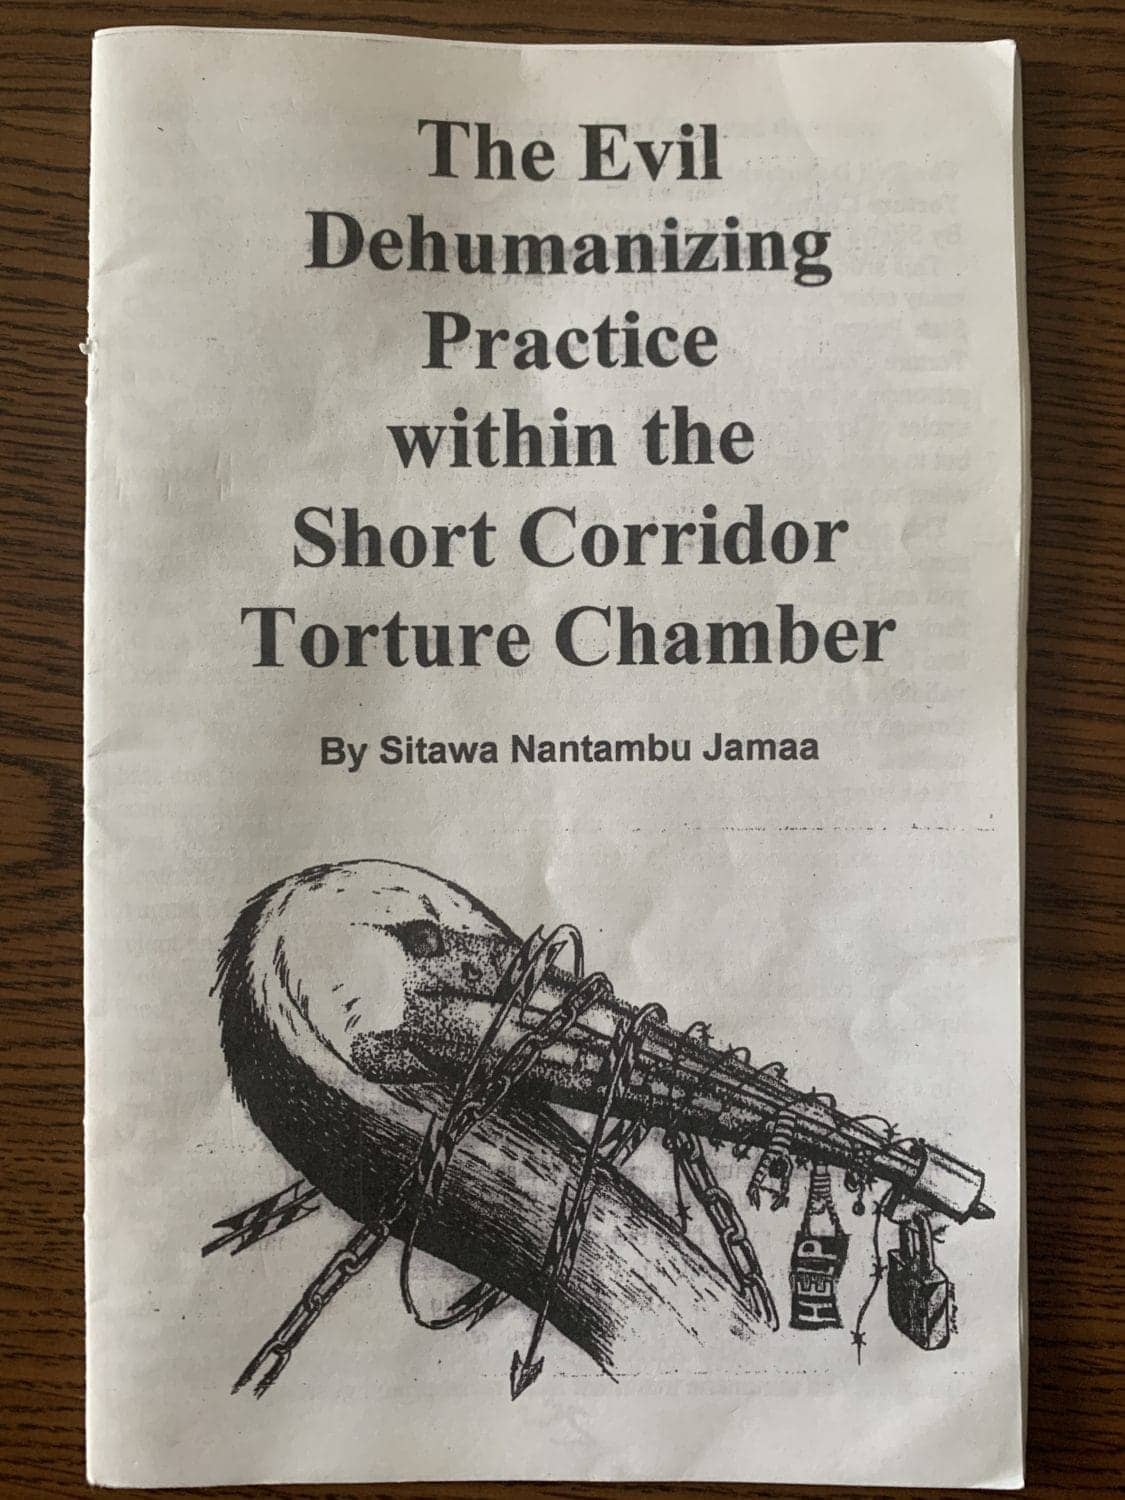 The-Evil-Dehumanizing-Practice-Within-the-Short-Corridor-Torture-Chamber-by-Sitawa-and-Mutope-booklet-cover, Liberate the Caged Voices, Abolition Now! 